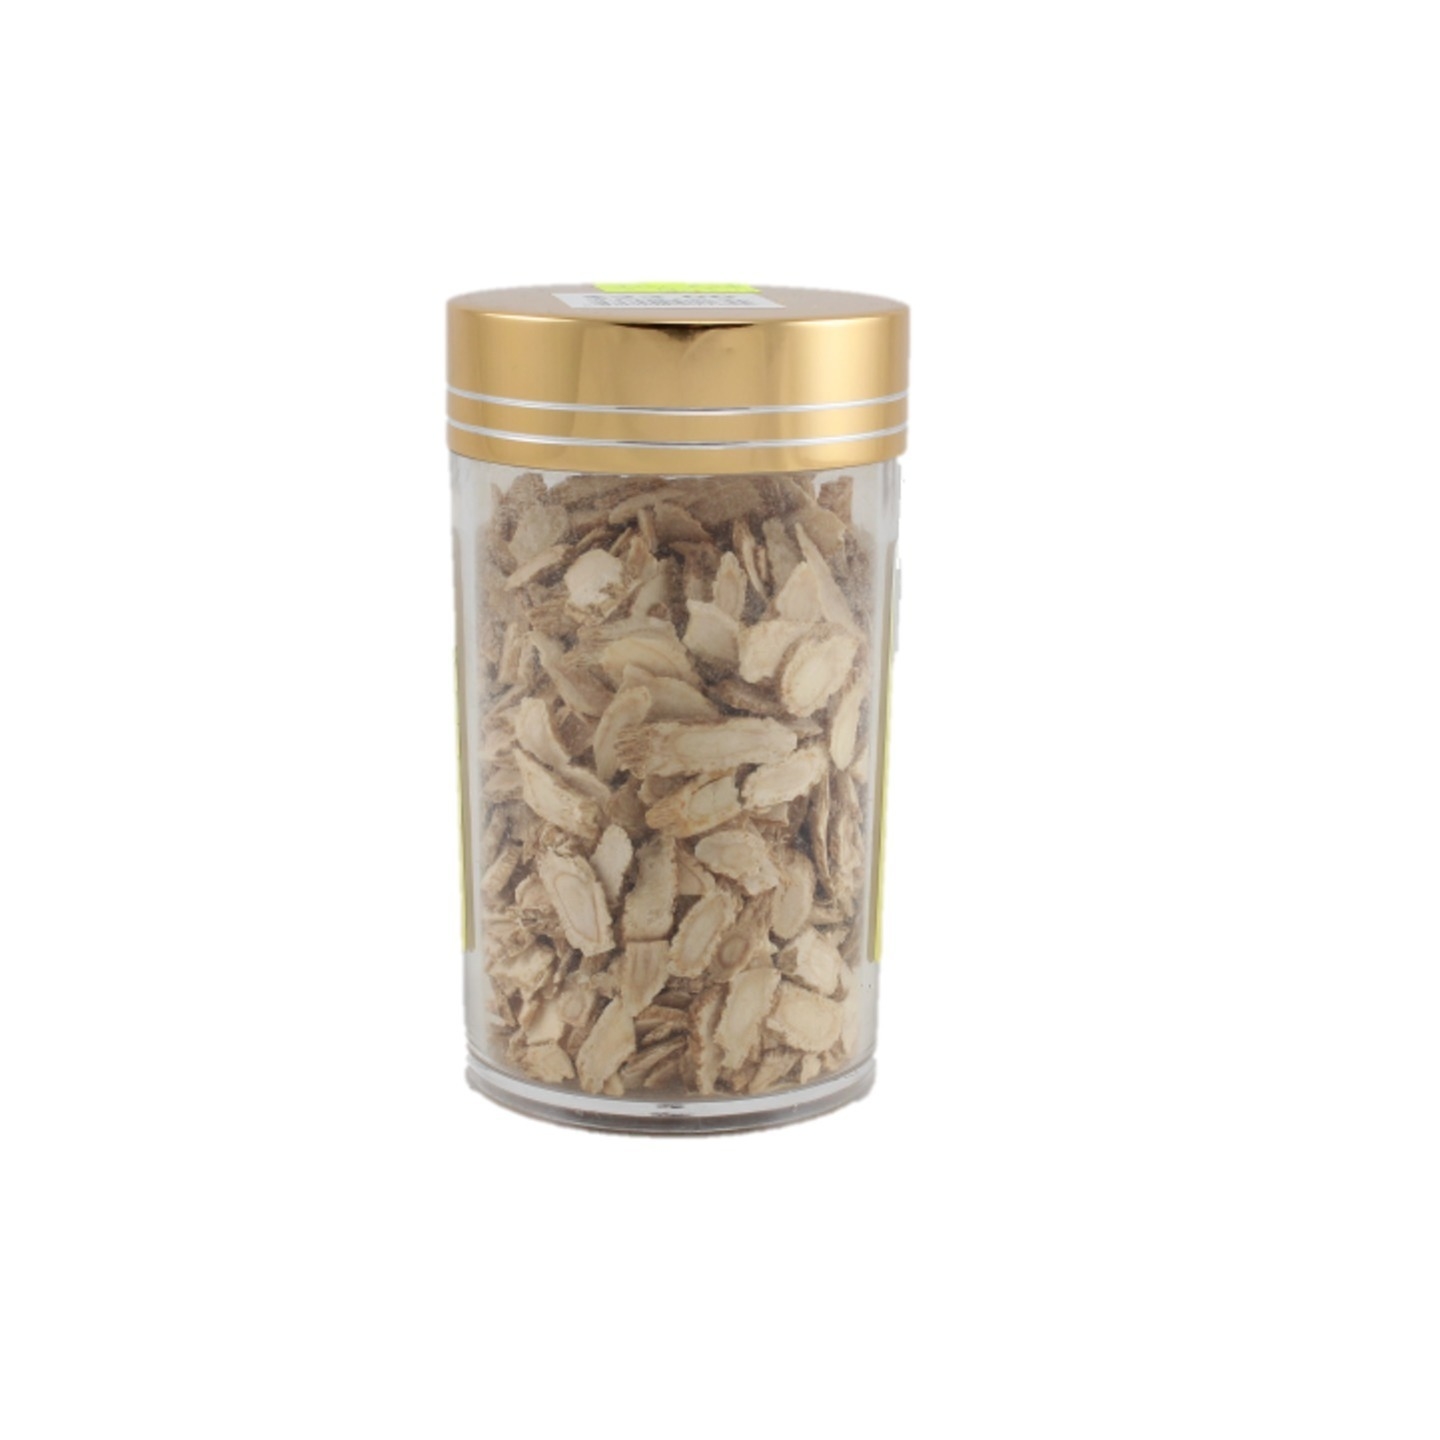 American Ginseng Pieces 泡参片 50g PROMOTION FOR 4